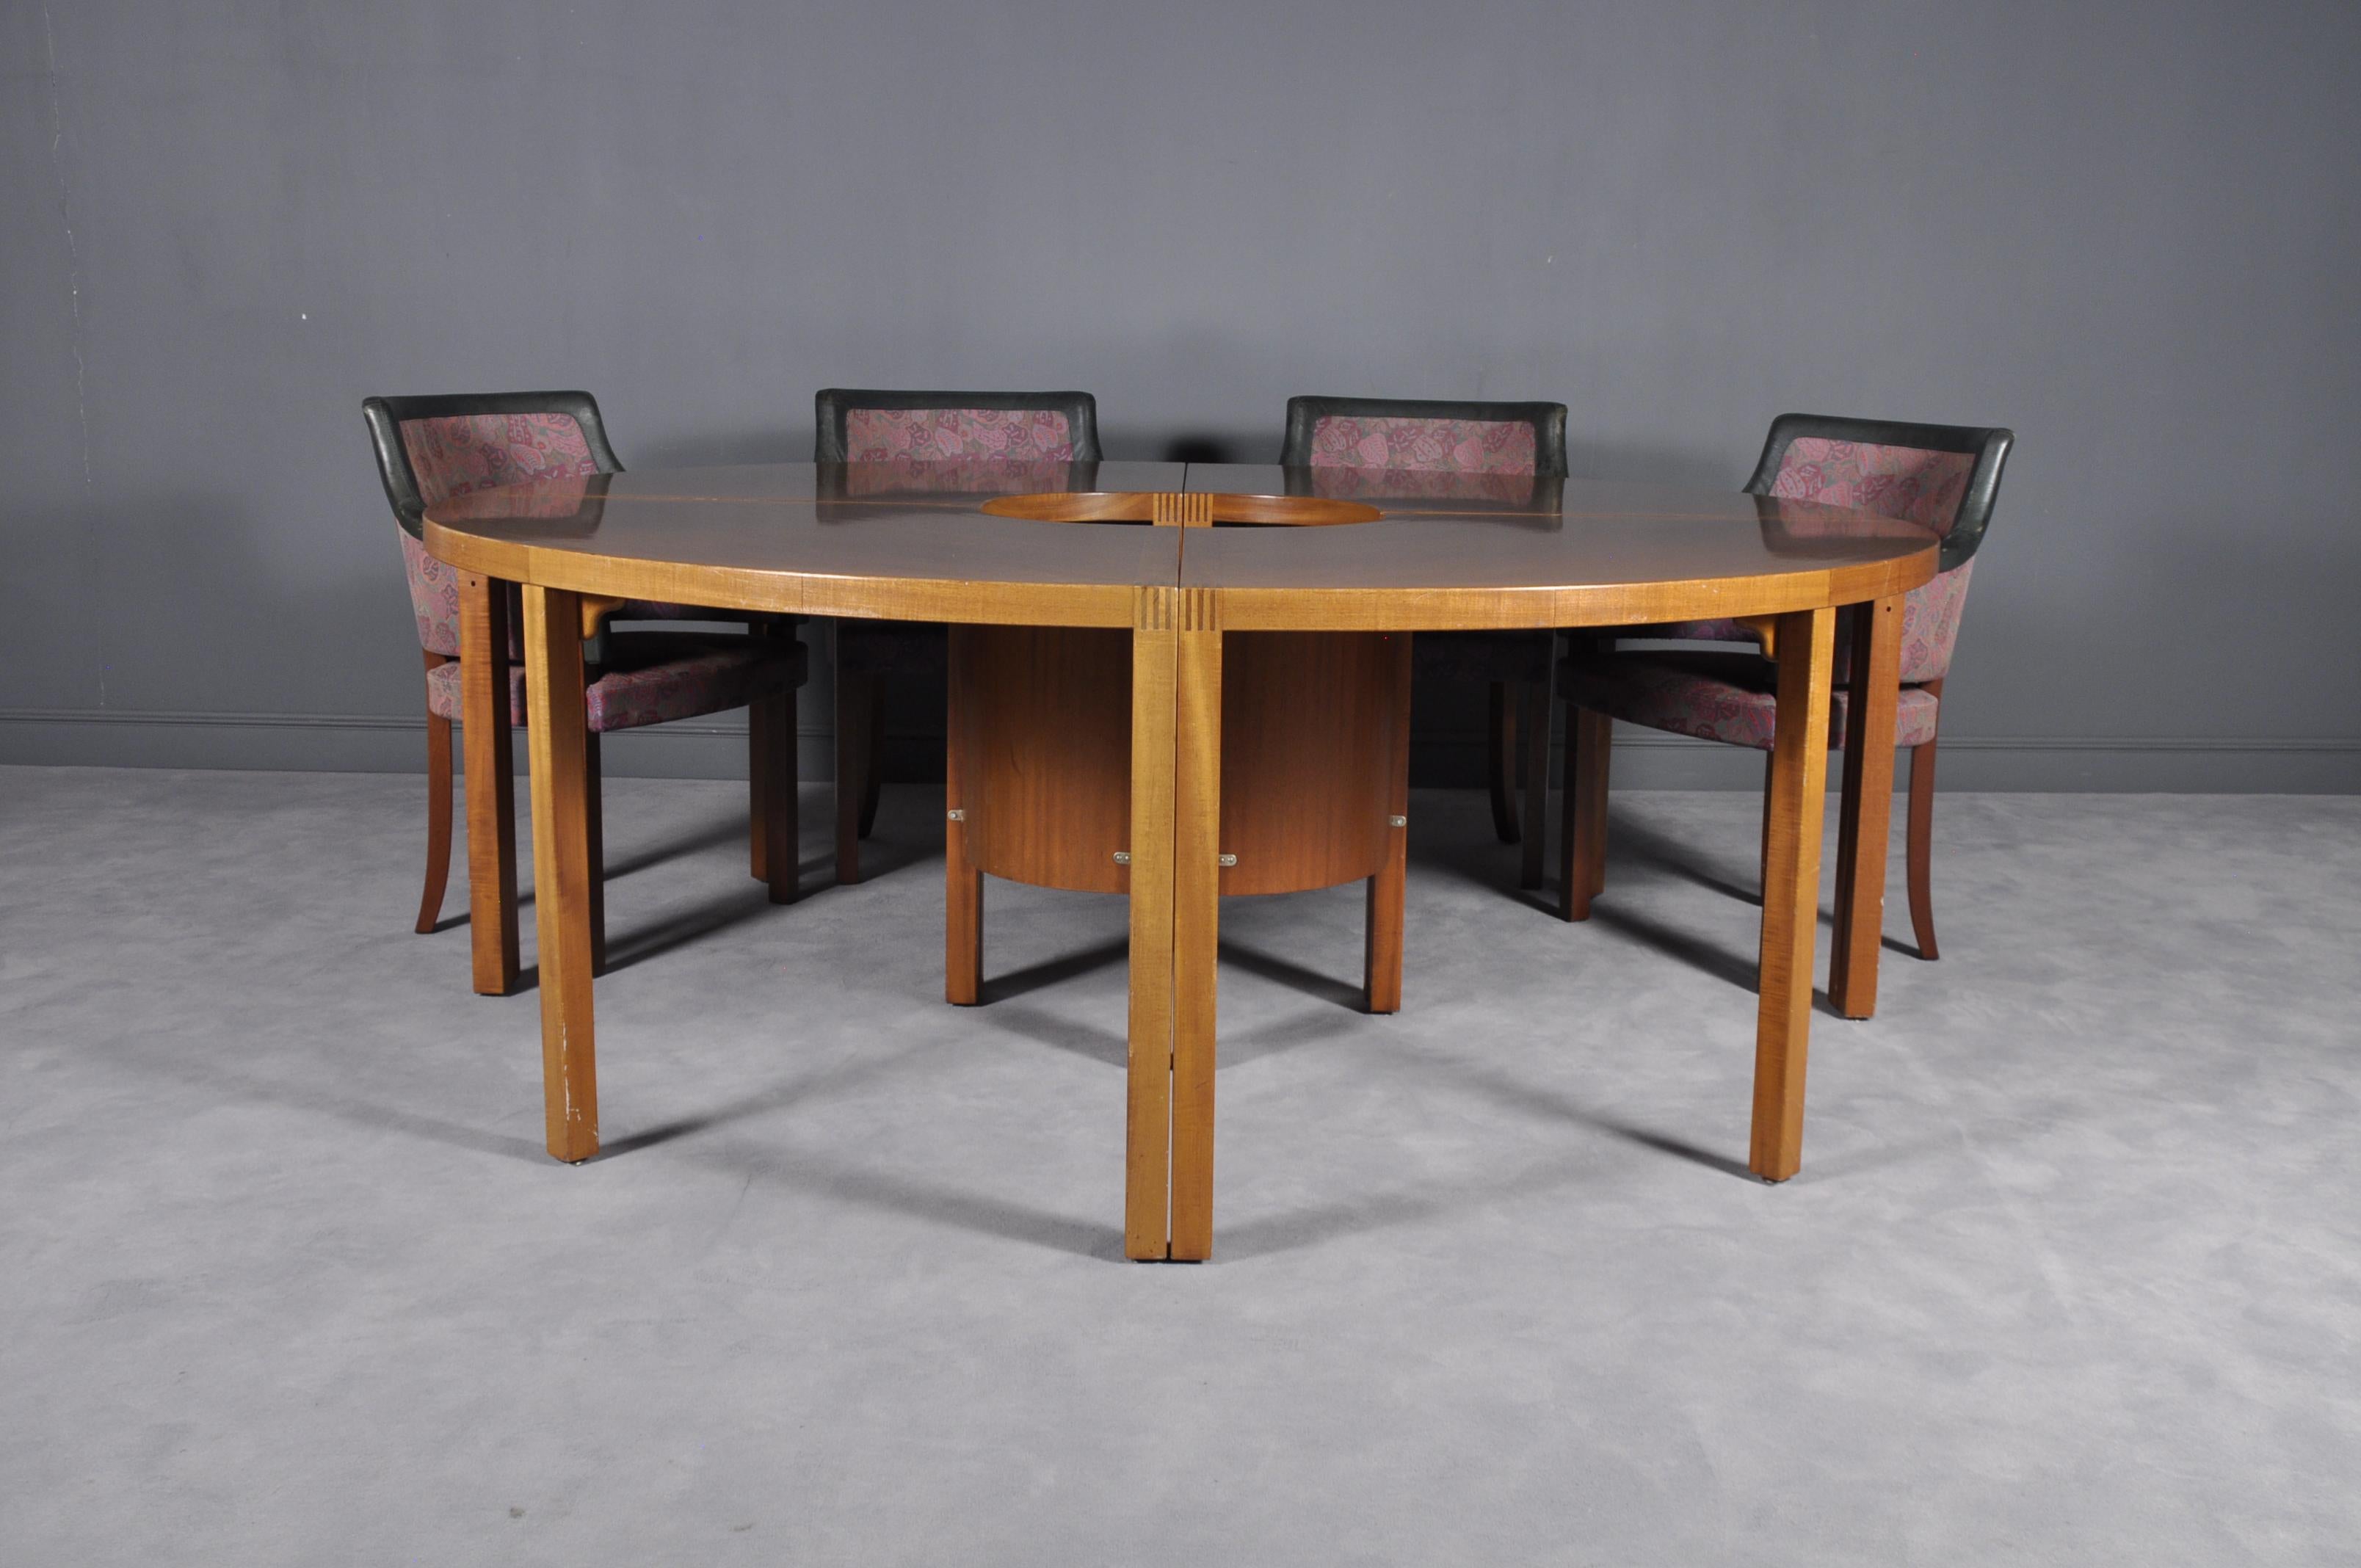 Swedish Conference Table and Eight ��“Riksdagen” Chairs by Åke Axelsson for Gärsnäs, 1981 For Sale